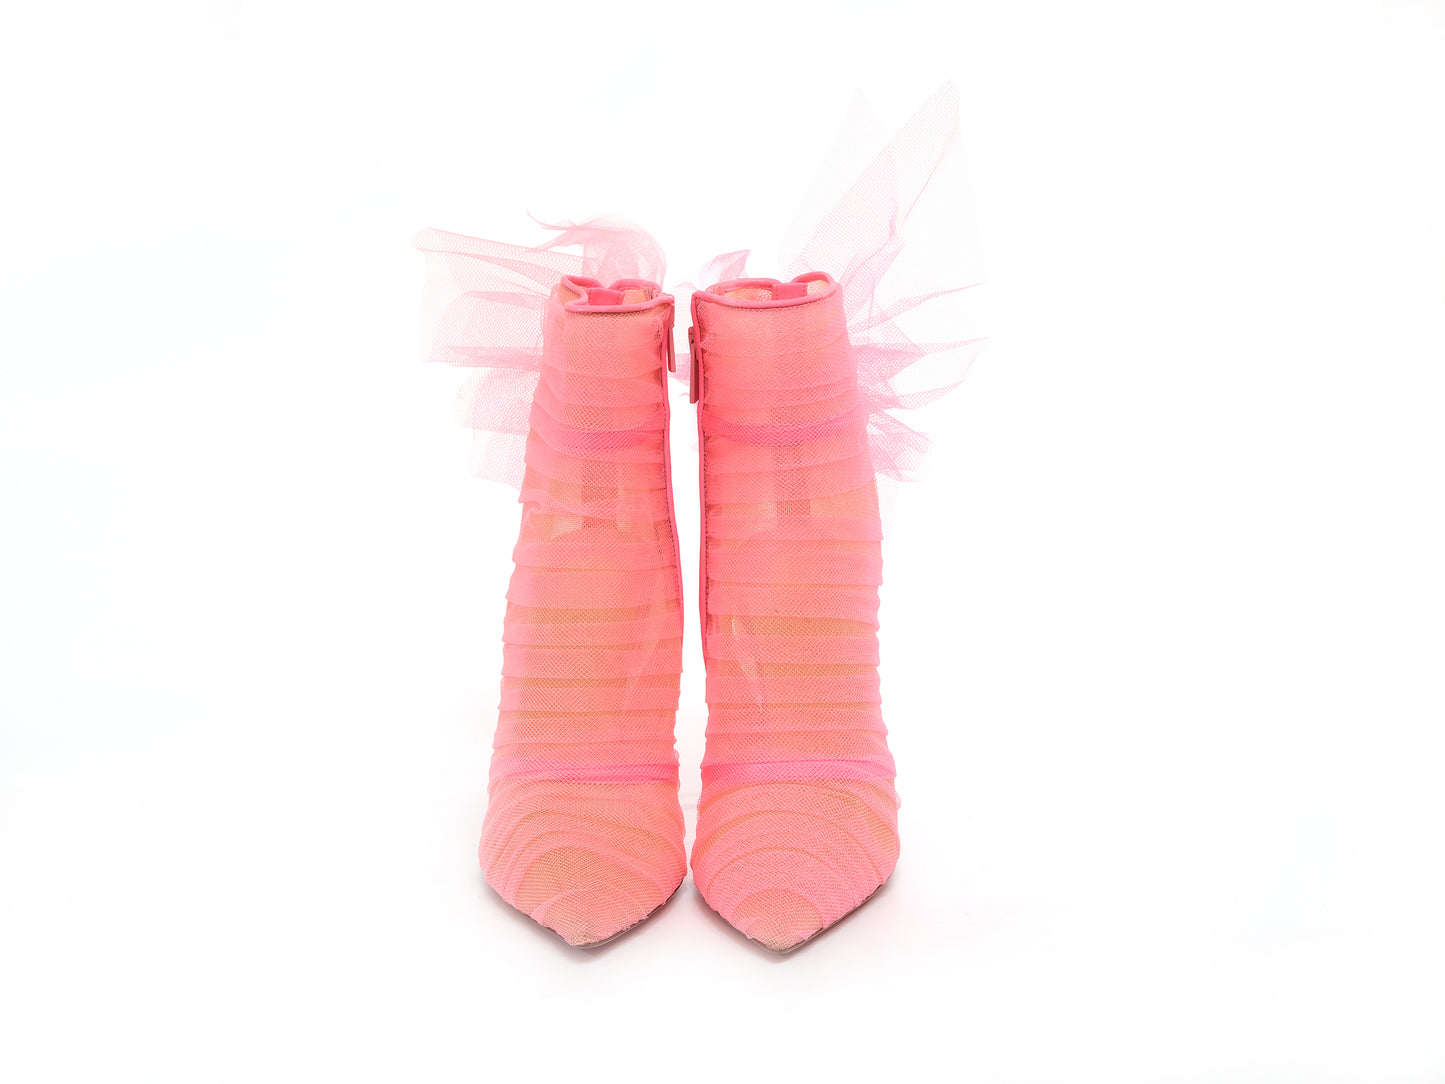 Christian Louboutin Libellibooty 100 Bubble Gum Pink Mesh and Leather High Heel Boots